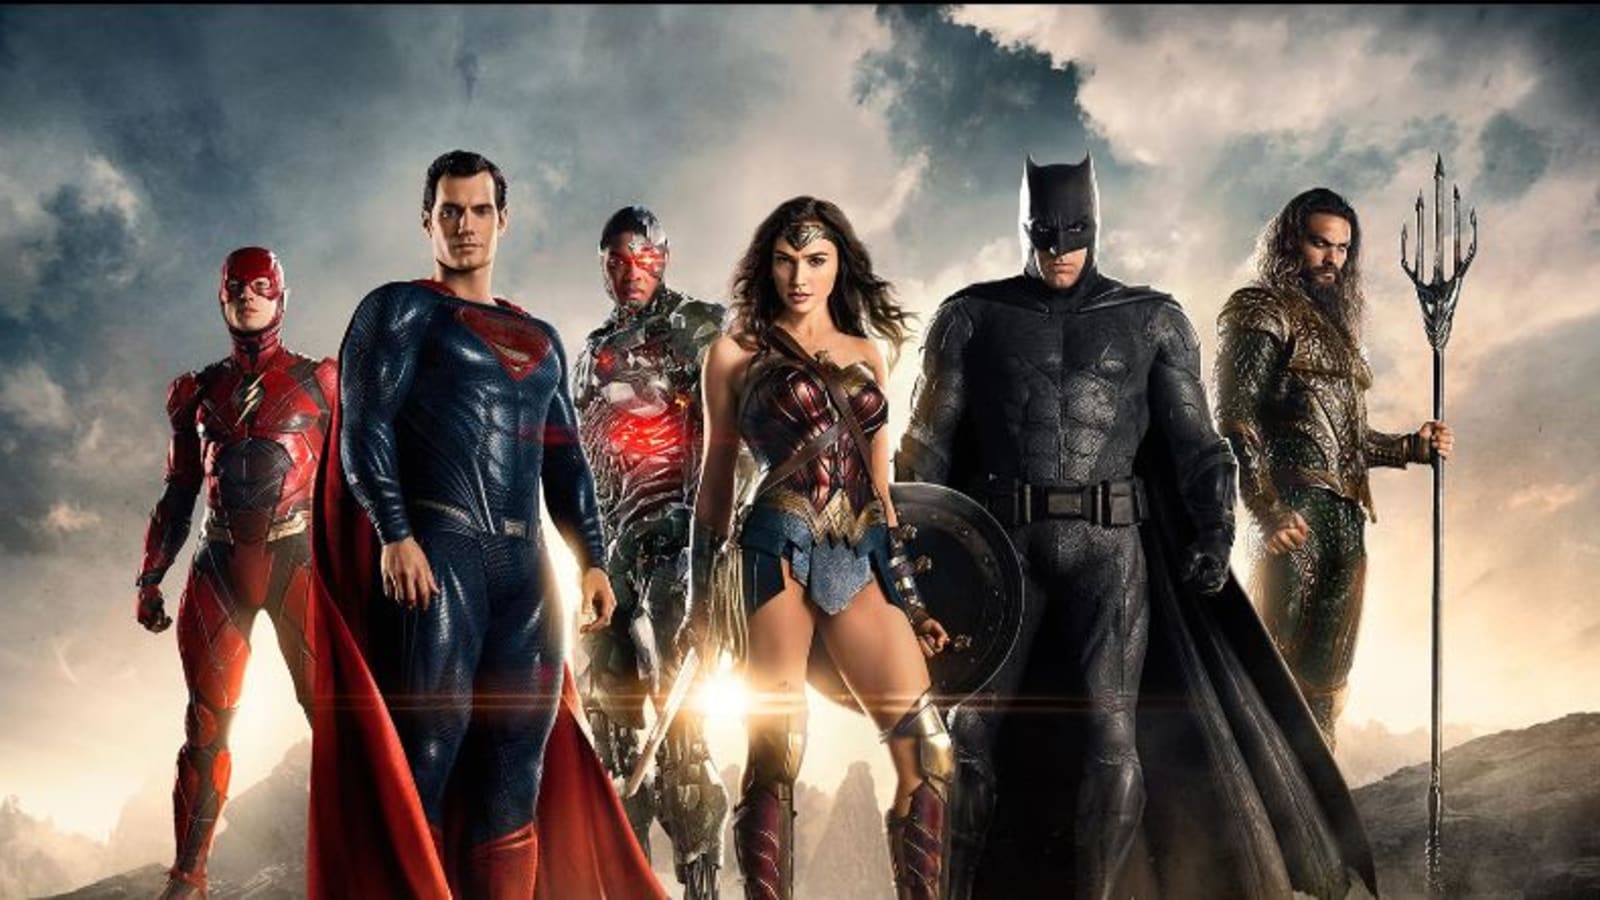 Warner Bros.' DC films are no longer trying to be Marvel